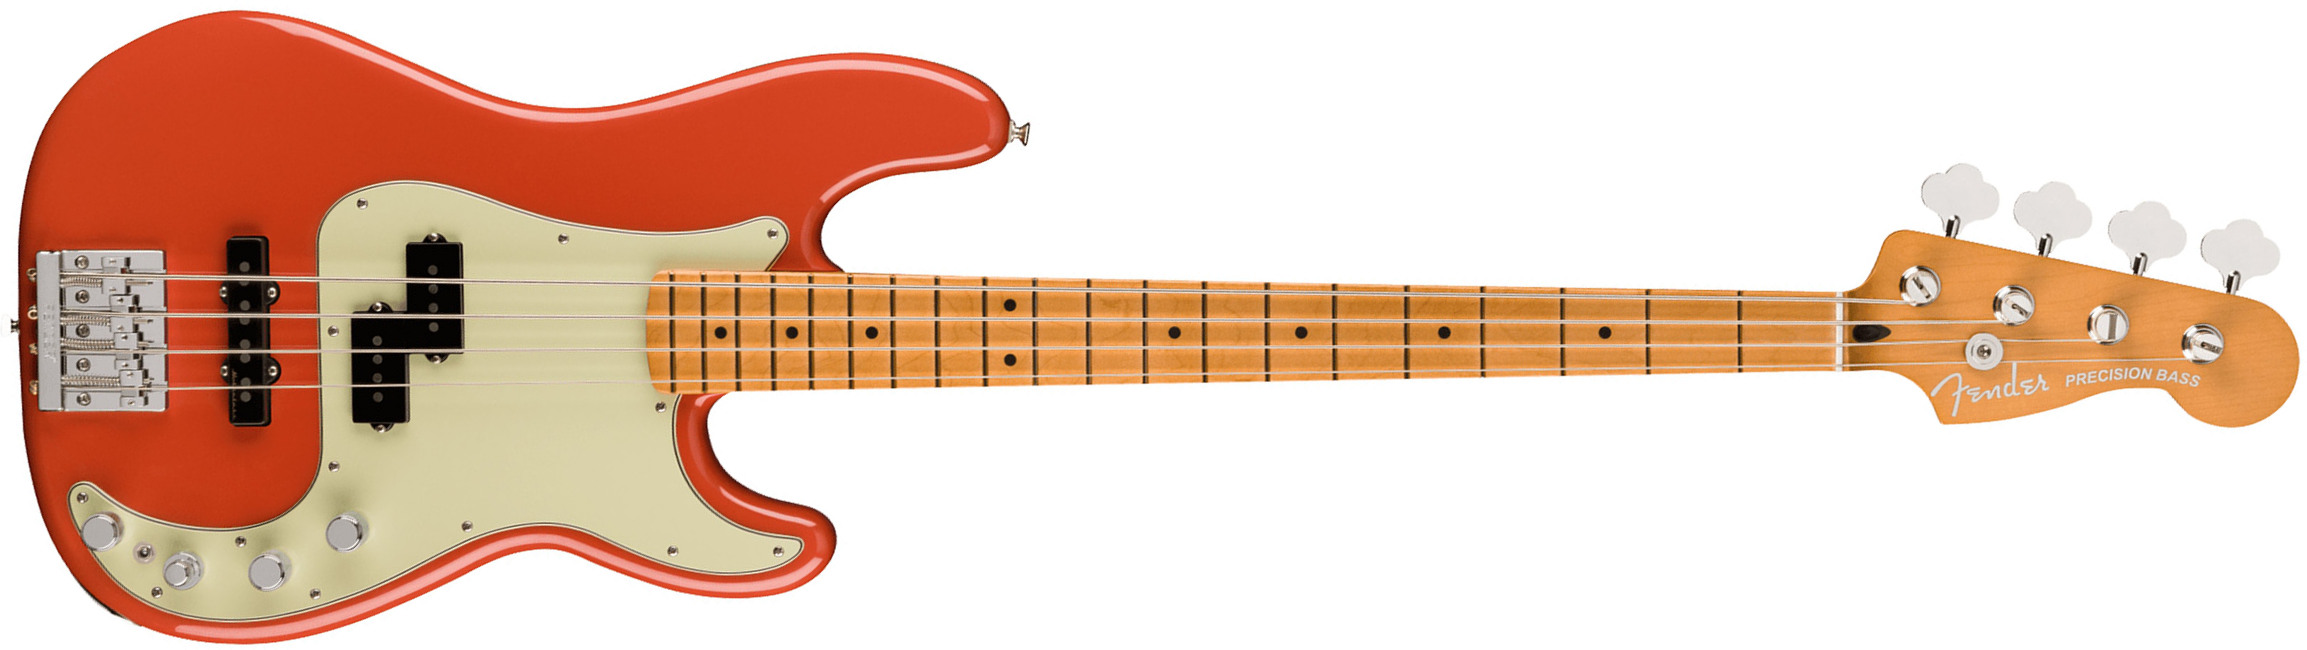 Fender Precision Bass Player Plus 2023 Mex Active Mn - Fiesta Red - Solidbody E-bass - Main picture